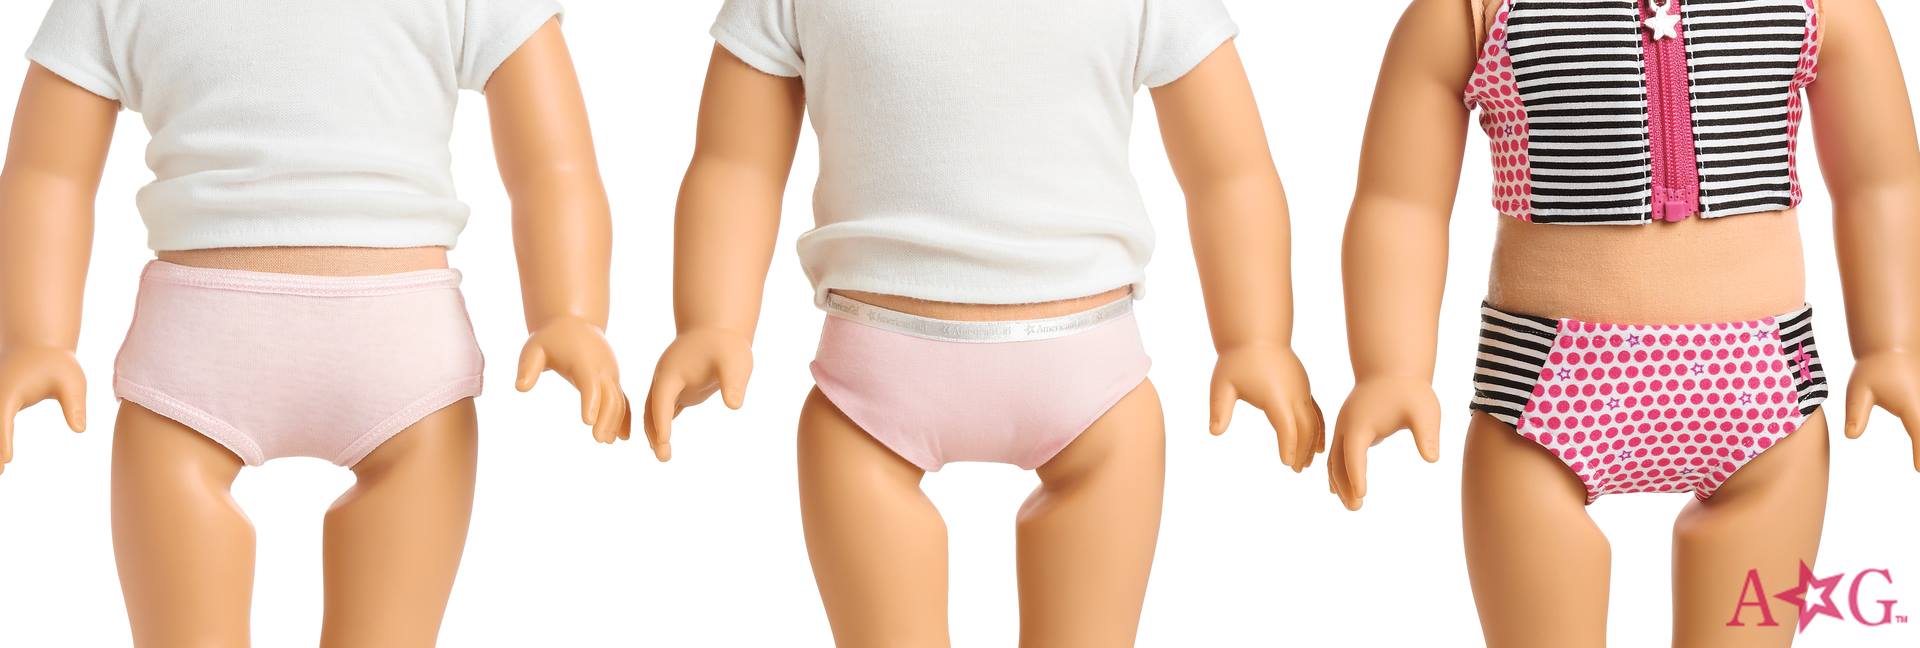 Doll Clothes Underwear Panty Short Fit 18 American Girl Dolls